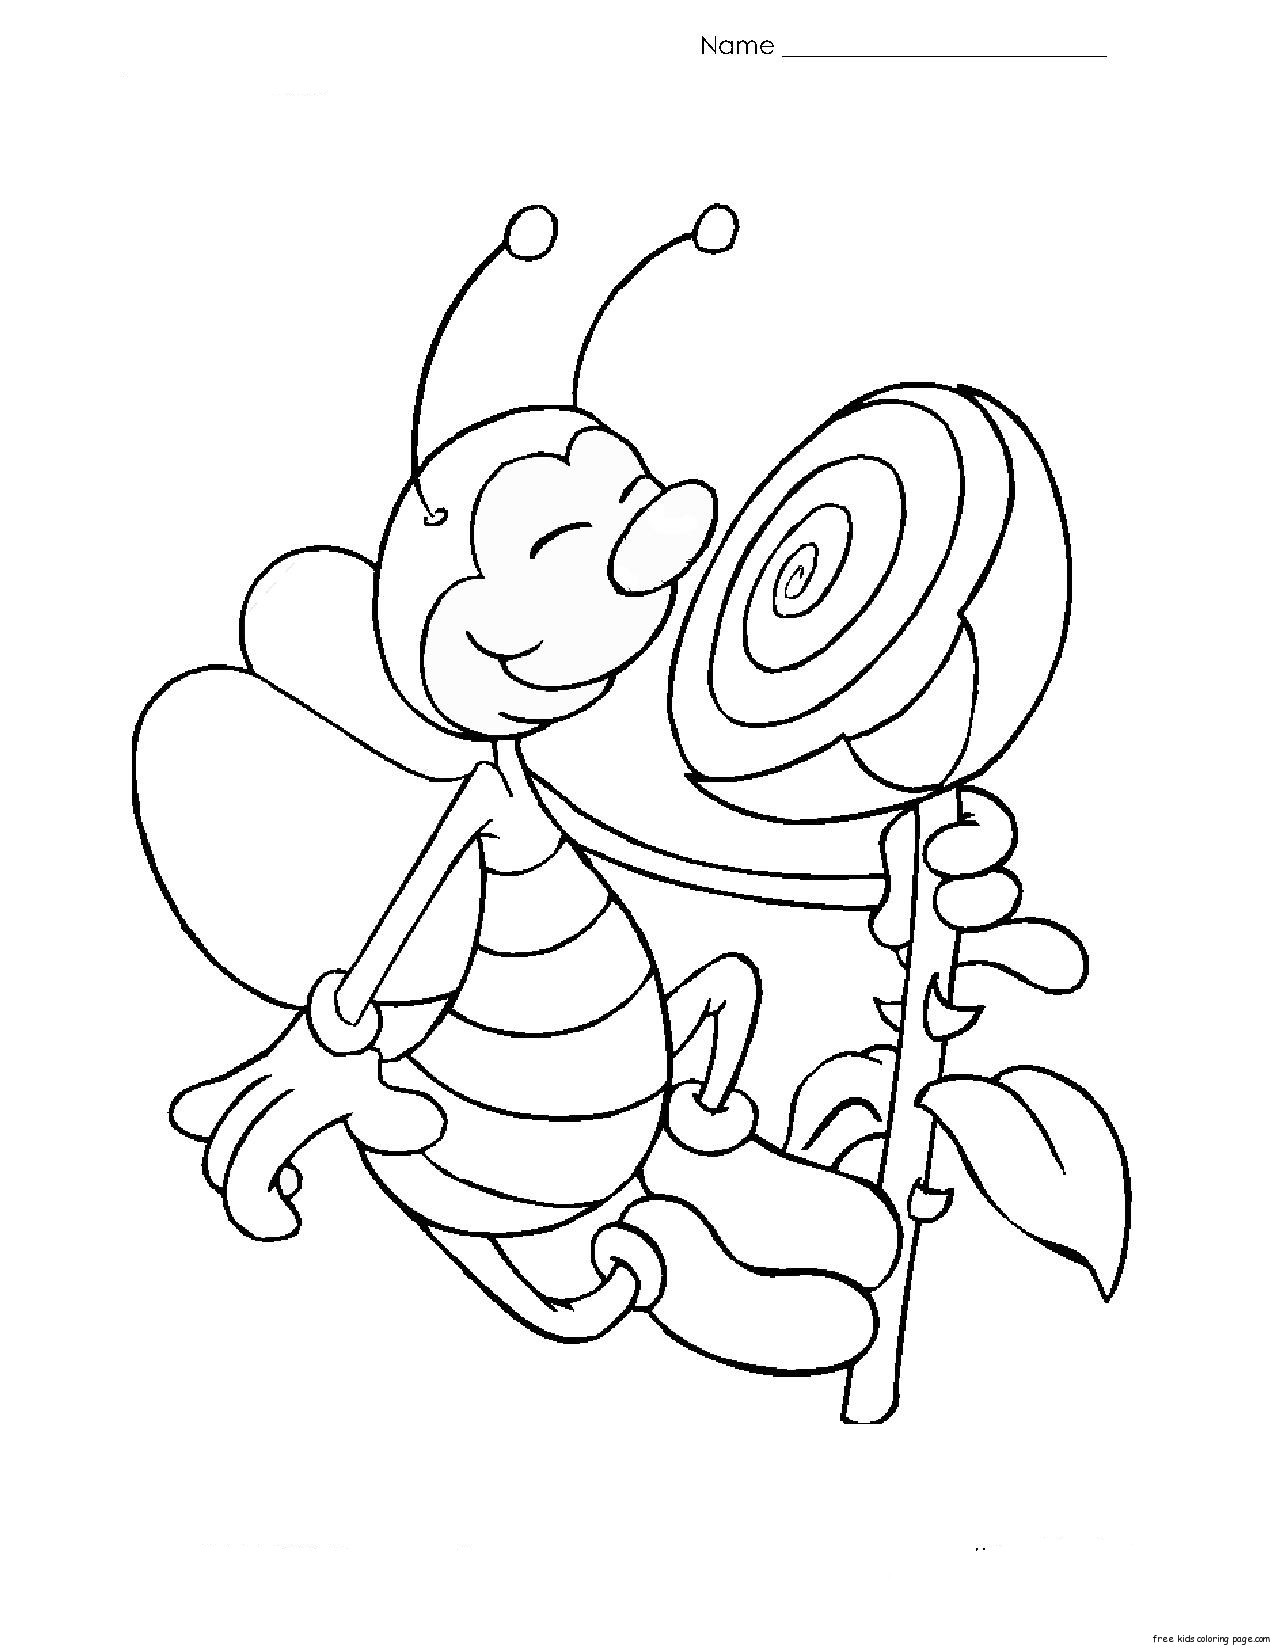 Print out coloring page Bee with flower1